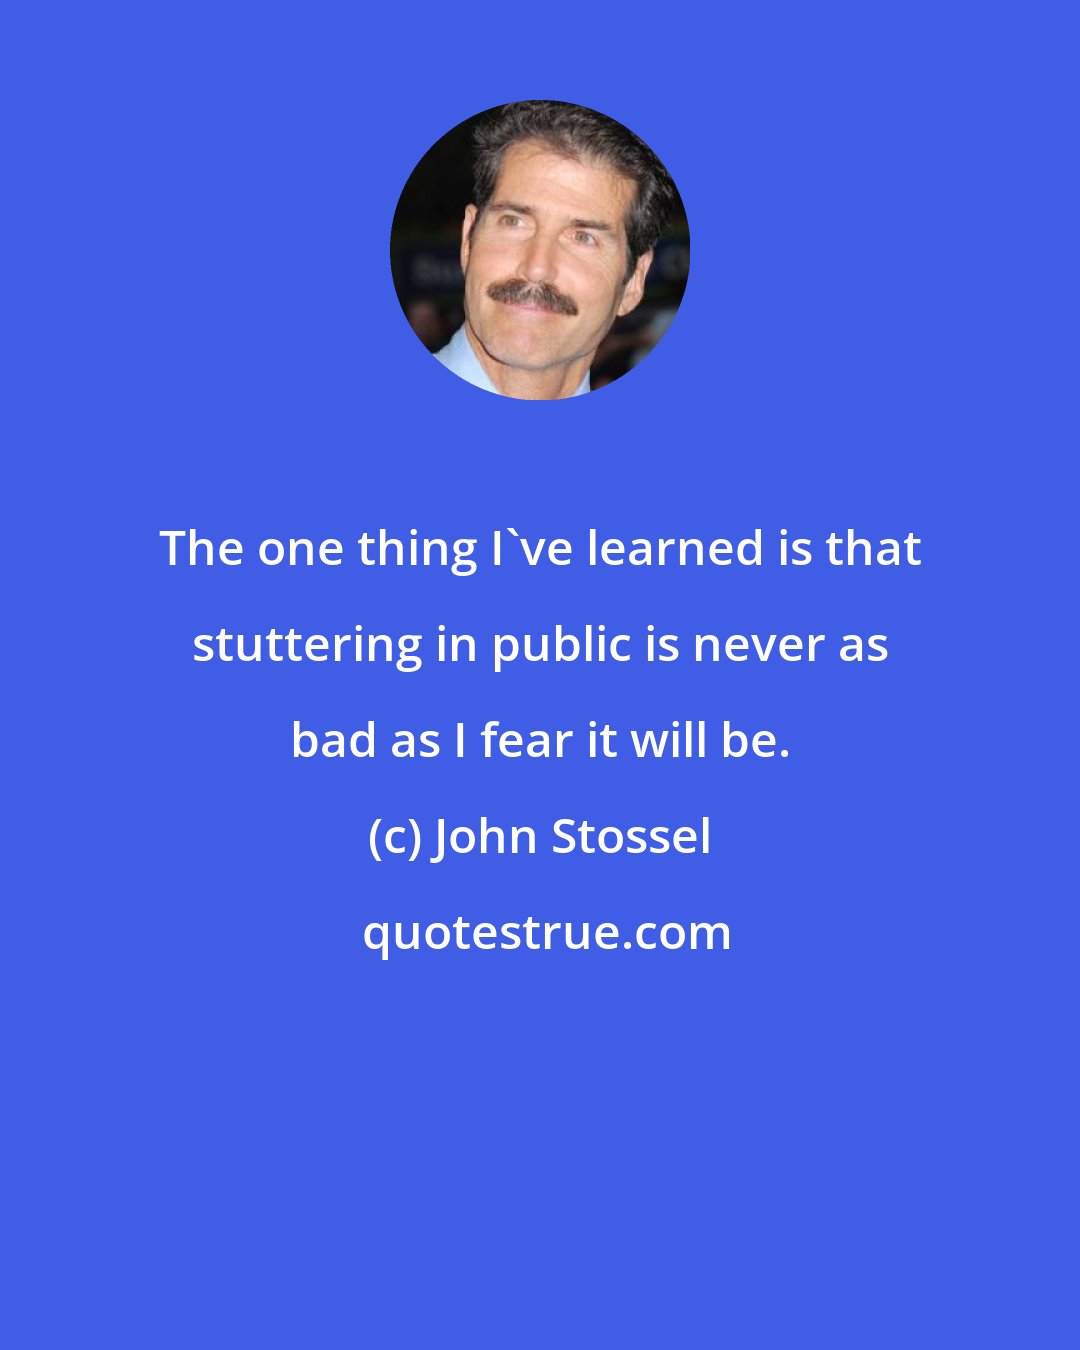 John Stossel: The one thing I've learned is that stuttering in public is never as bad as I fear it will be.